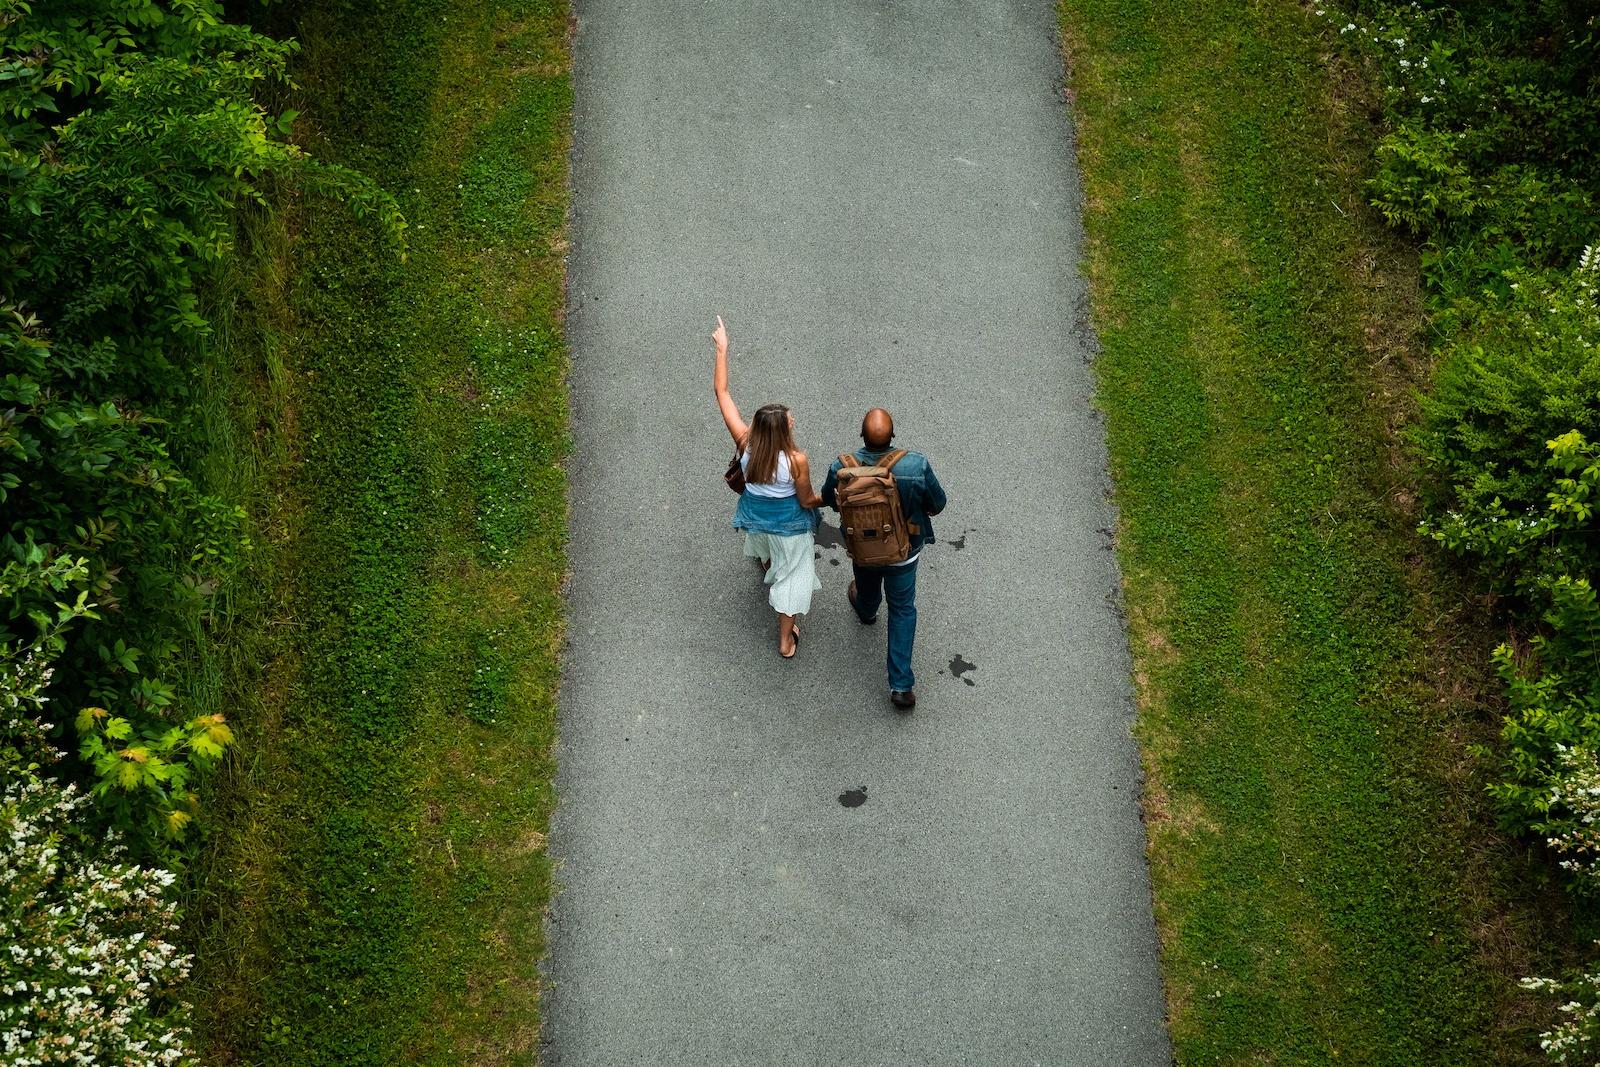 Two people go for walk along a path